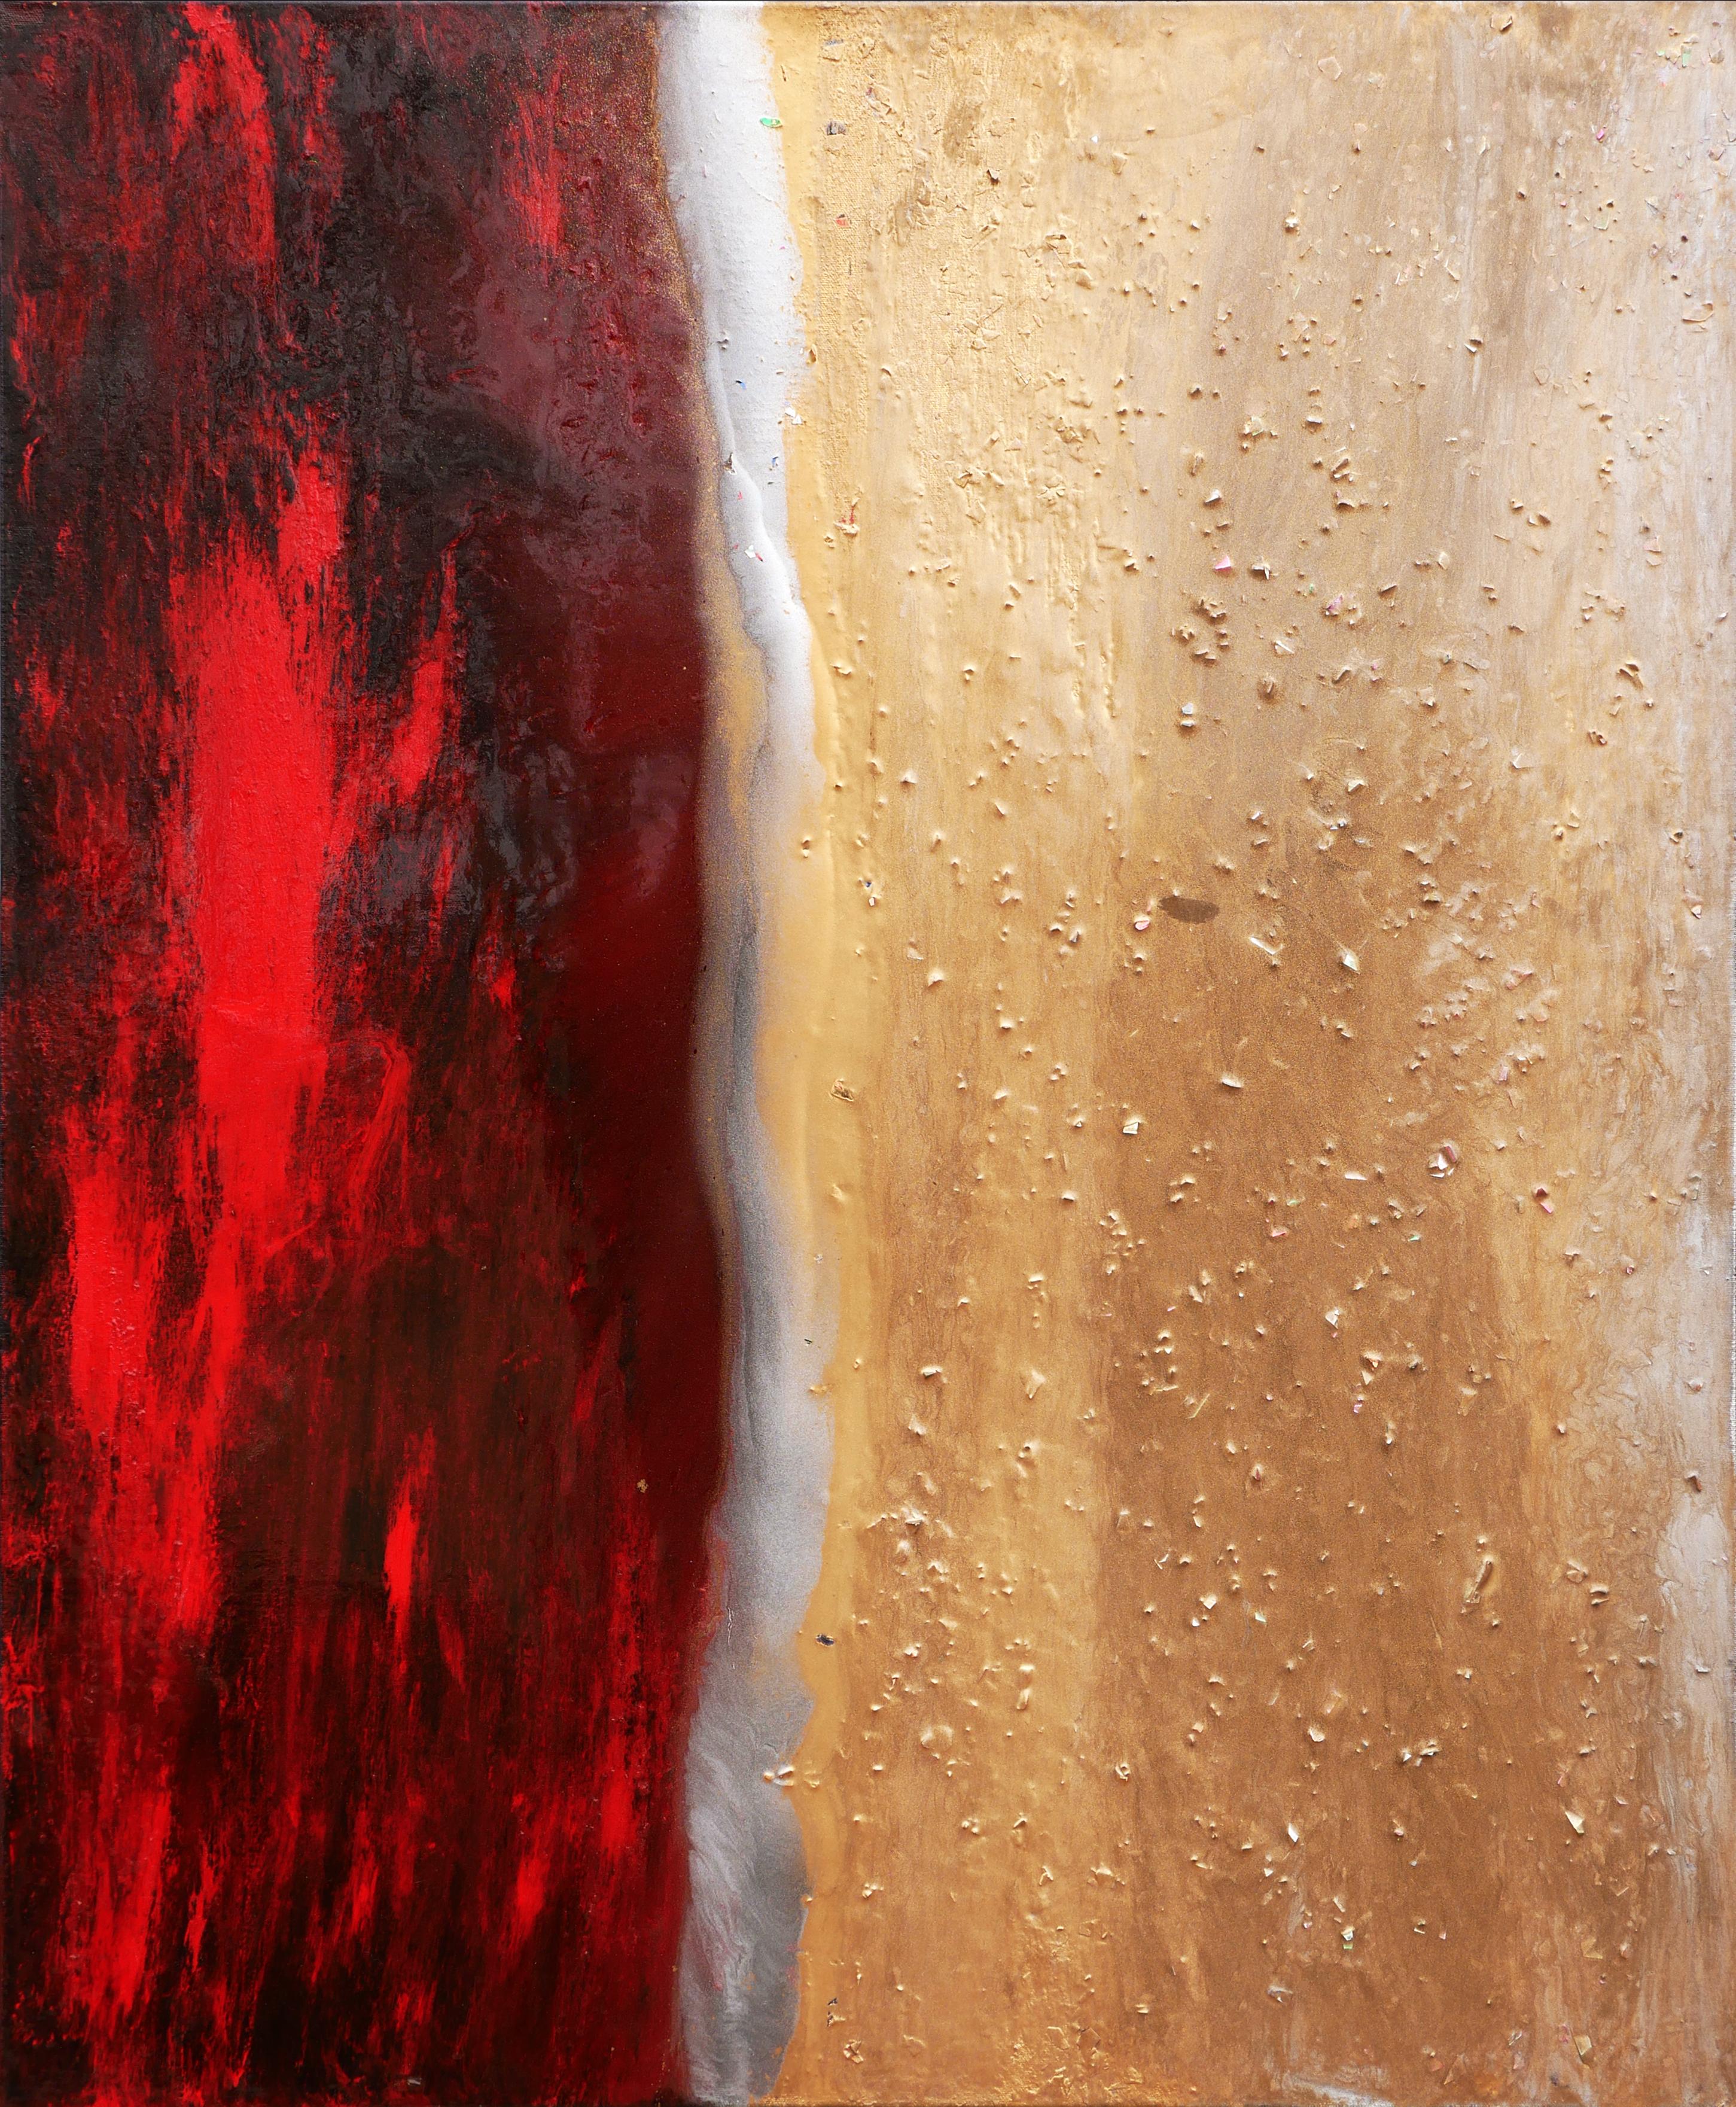 Unknown Abstract Painting - "Panic Attack" Red, Silver, and Gold Abstract Textured Painting